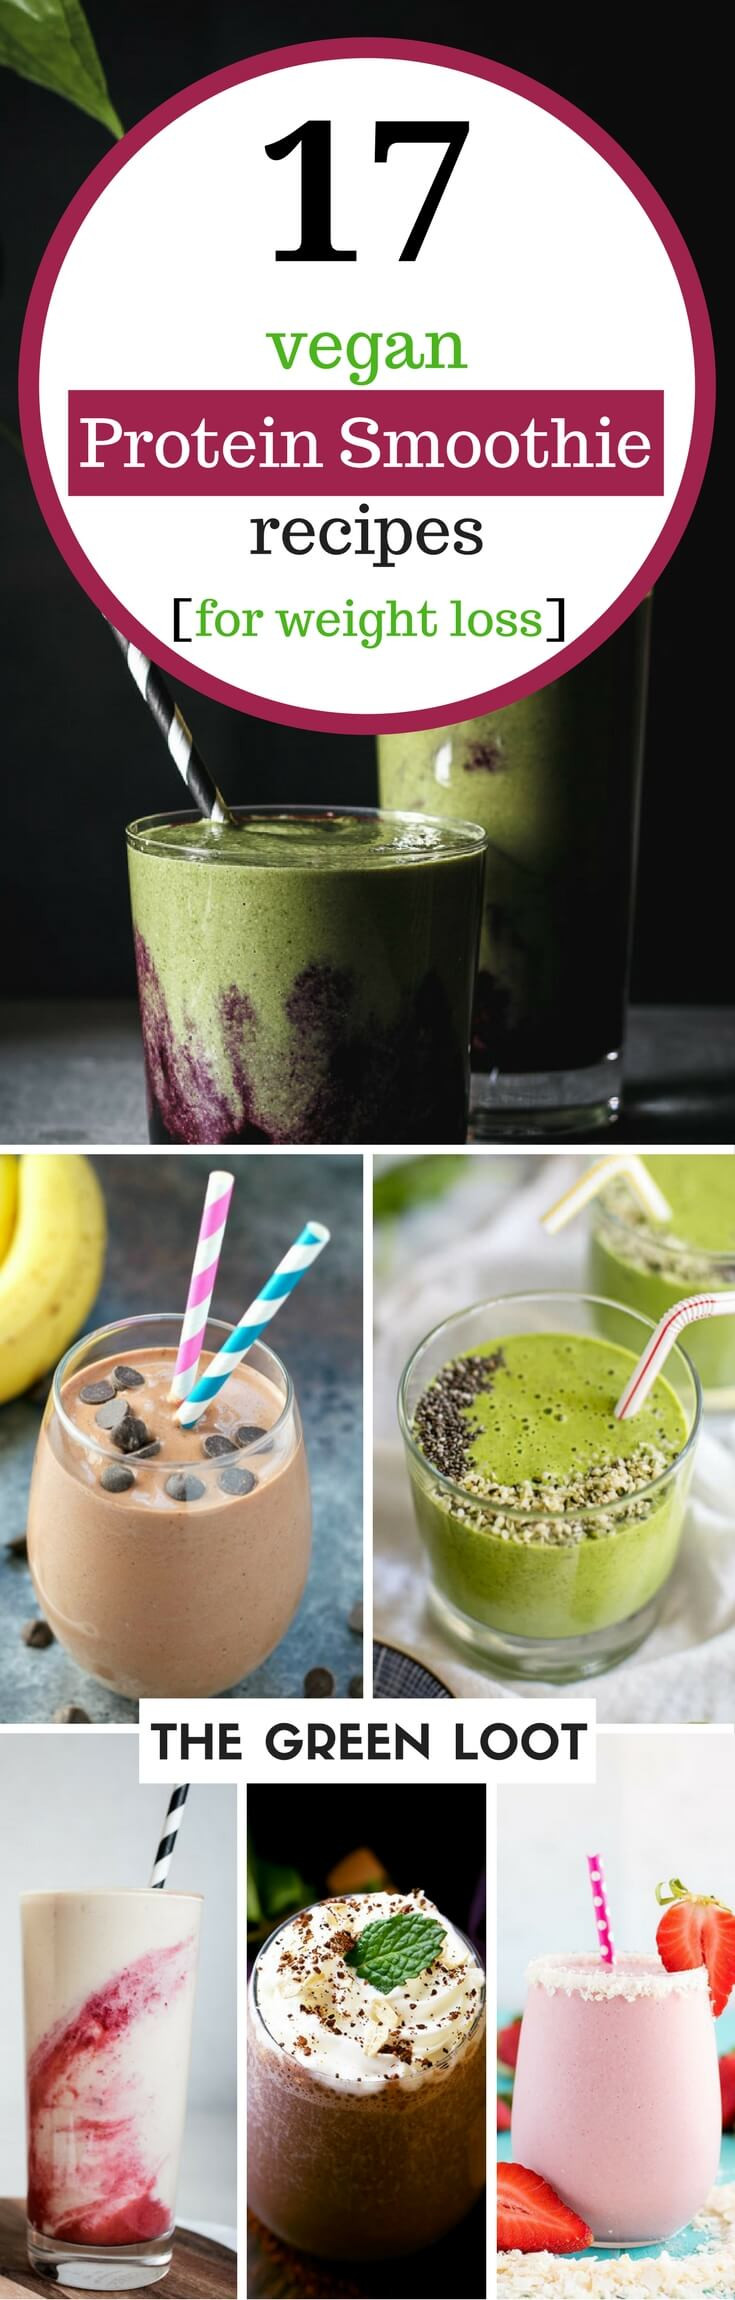 Vegan Protein Powder Recipes
 17 Tasty Vegan Protein Smoothie Recipes for Weight Loss